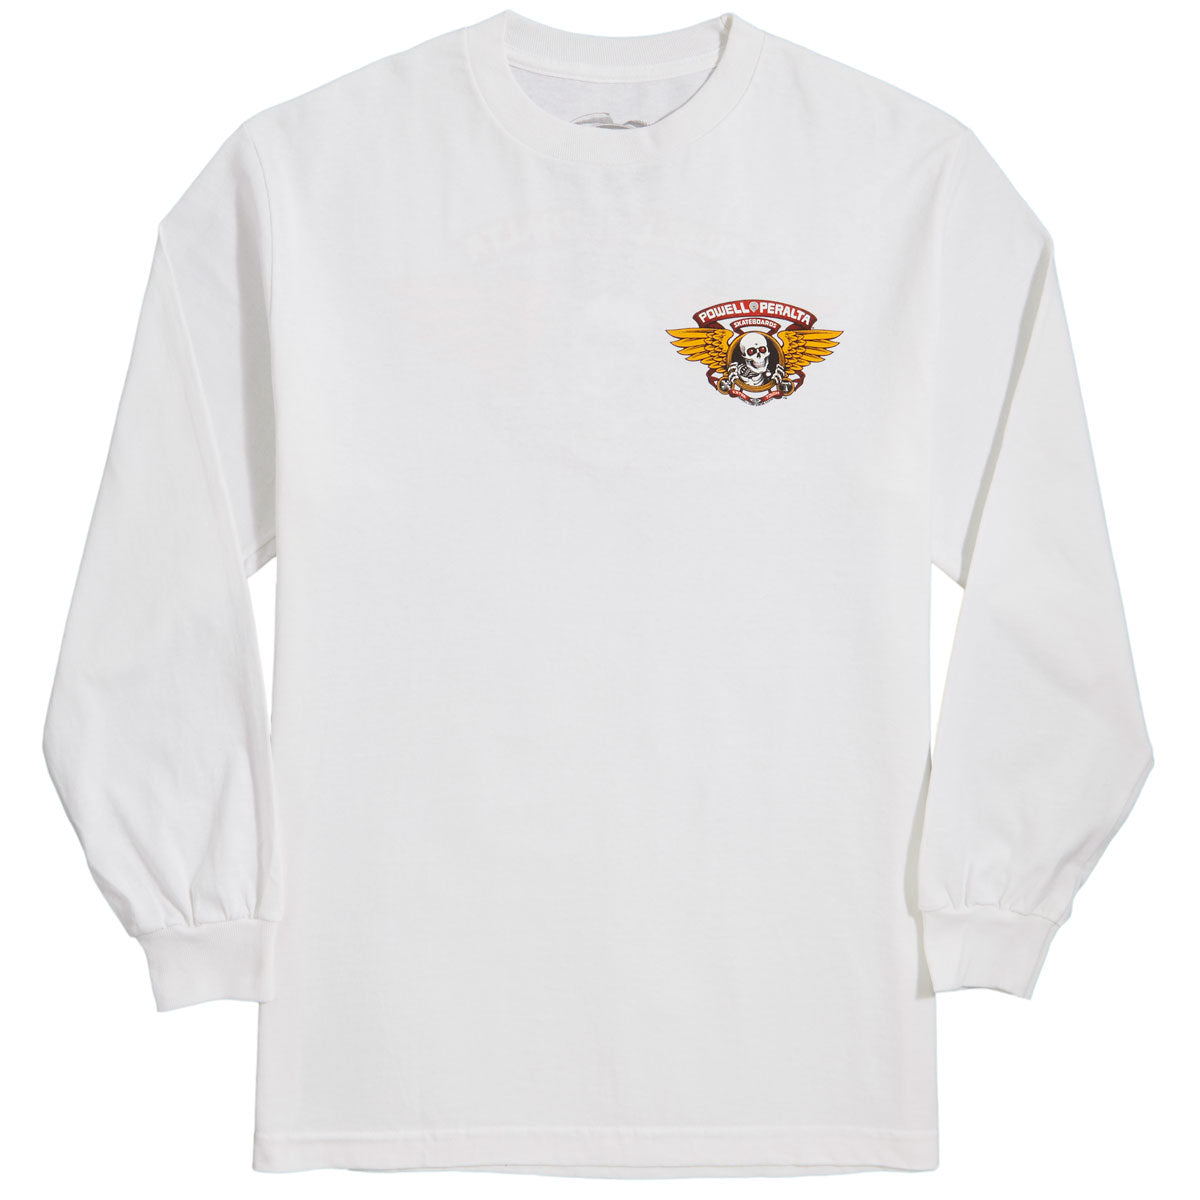 Powell-Peralta Winged Ripper Long Sleeve T-Shirt - White image 2